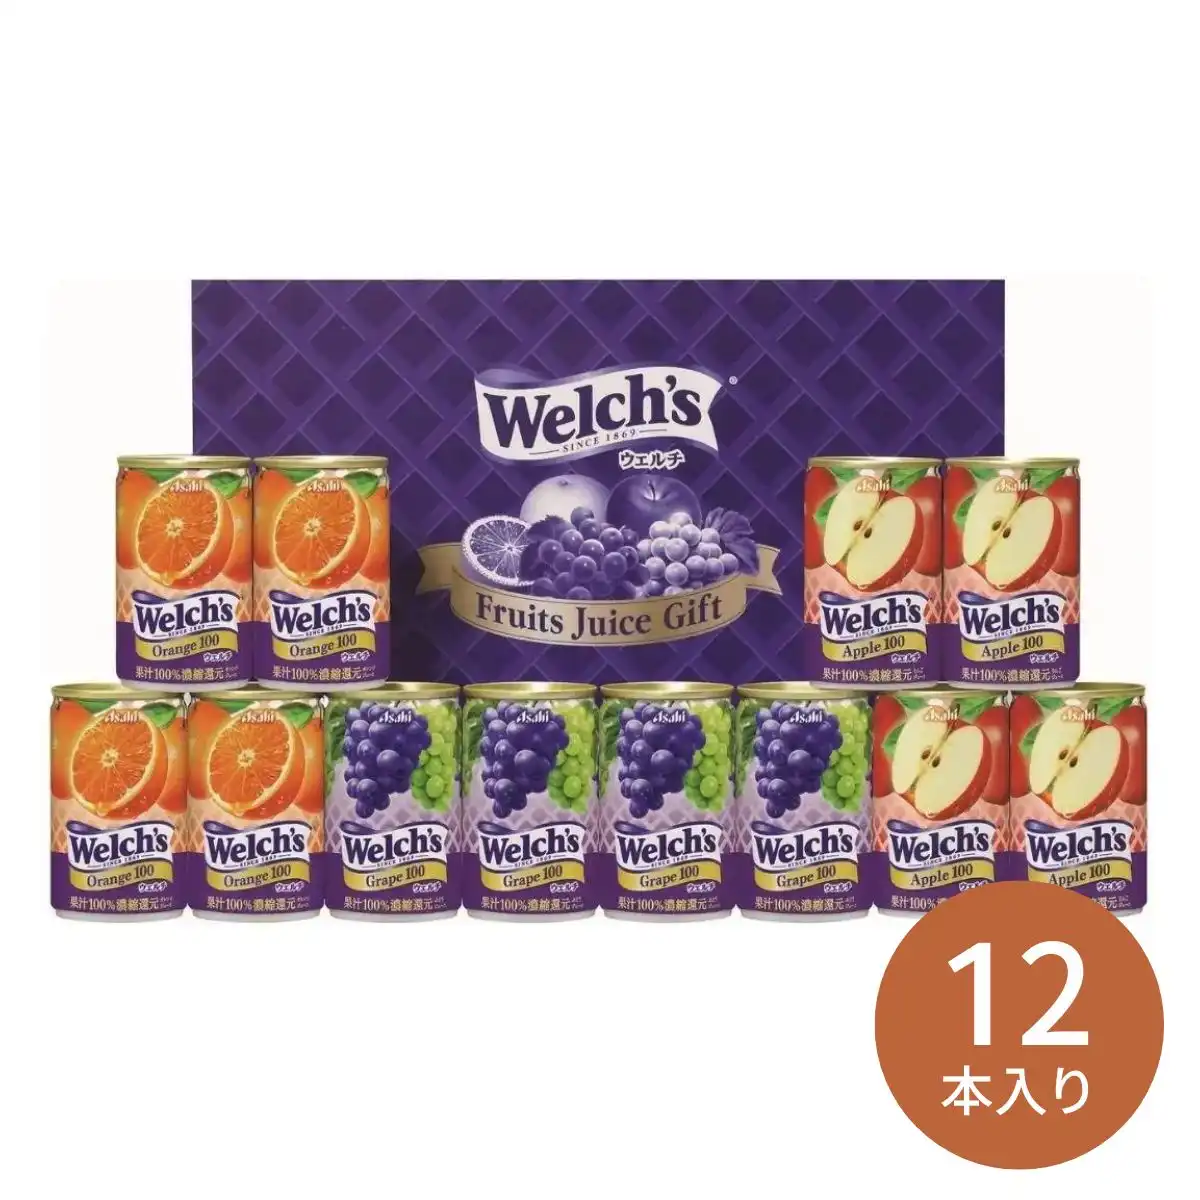 「Welch’ｓ」ギフト W15